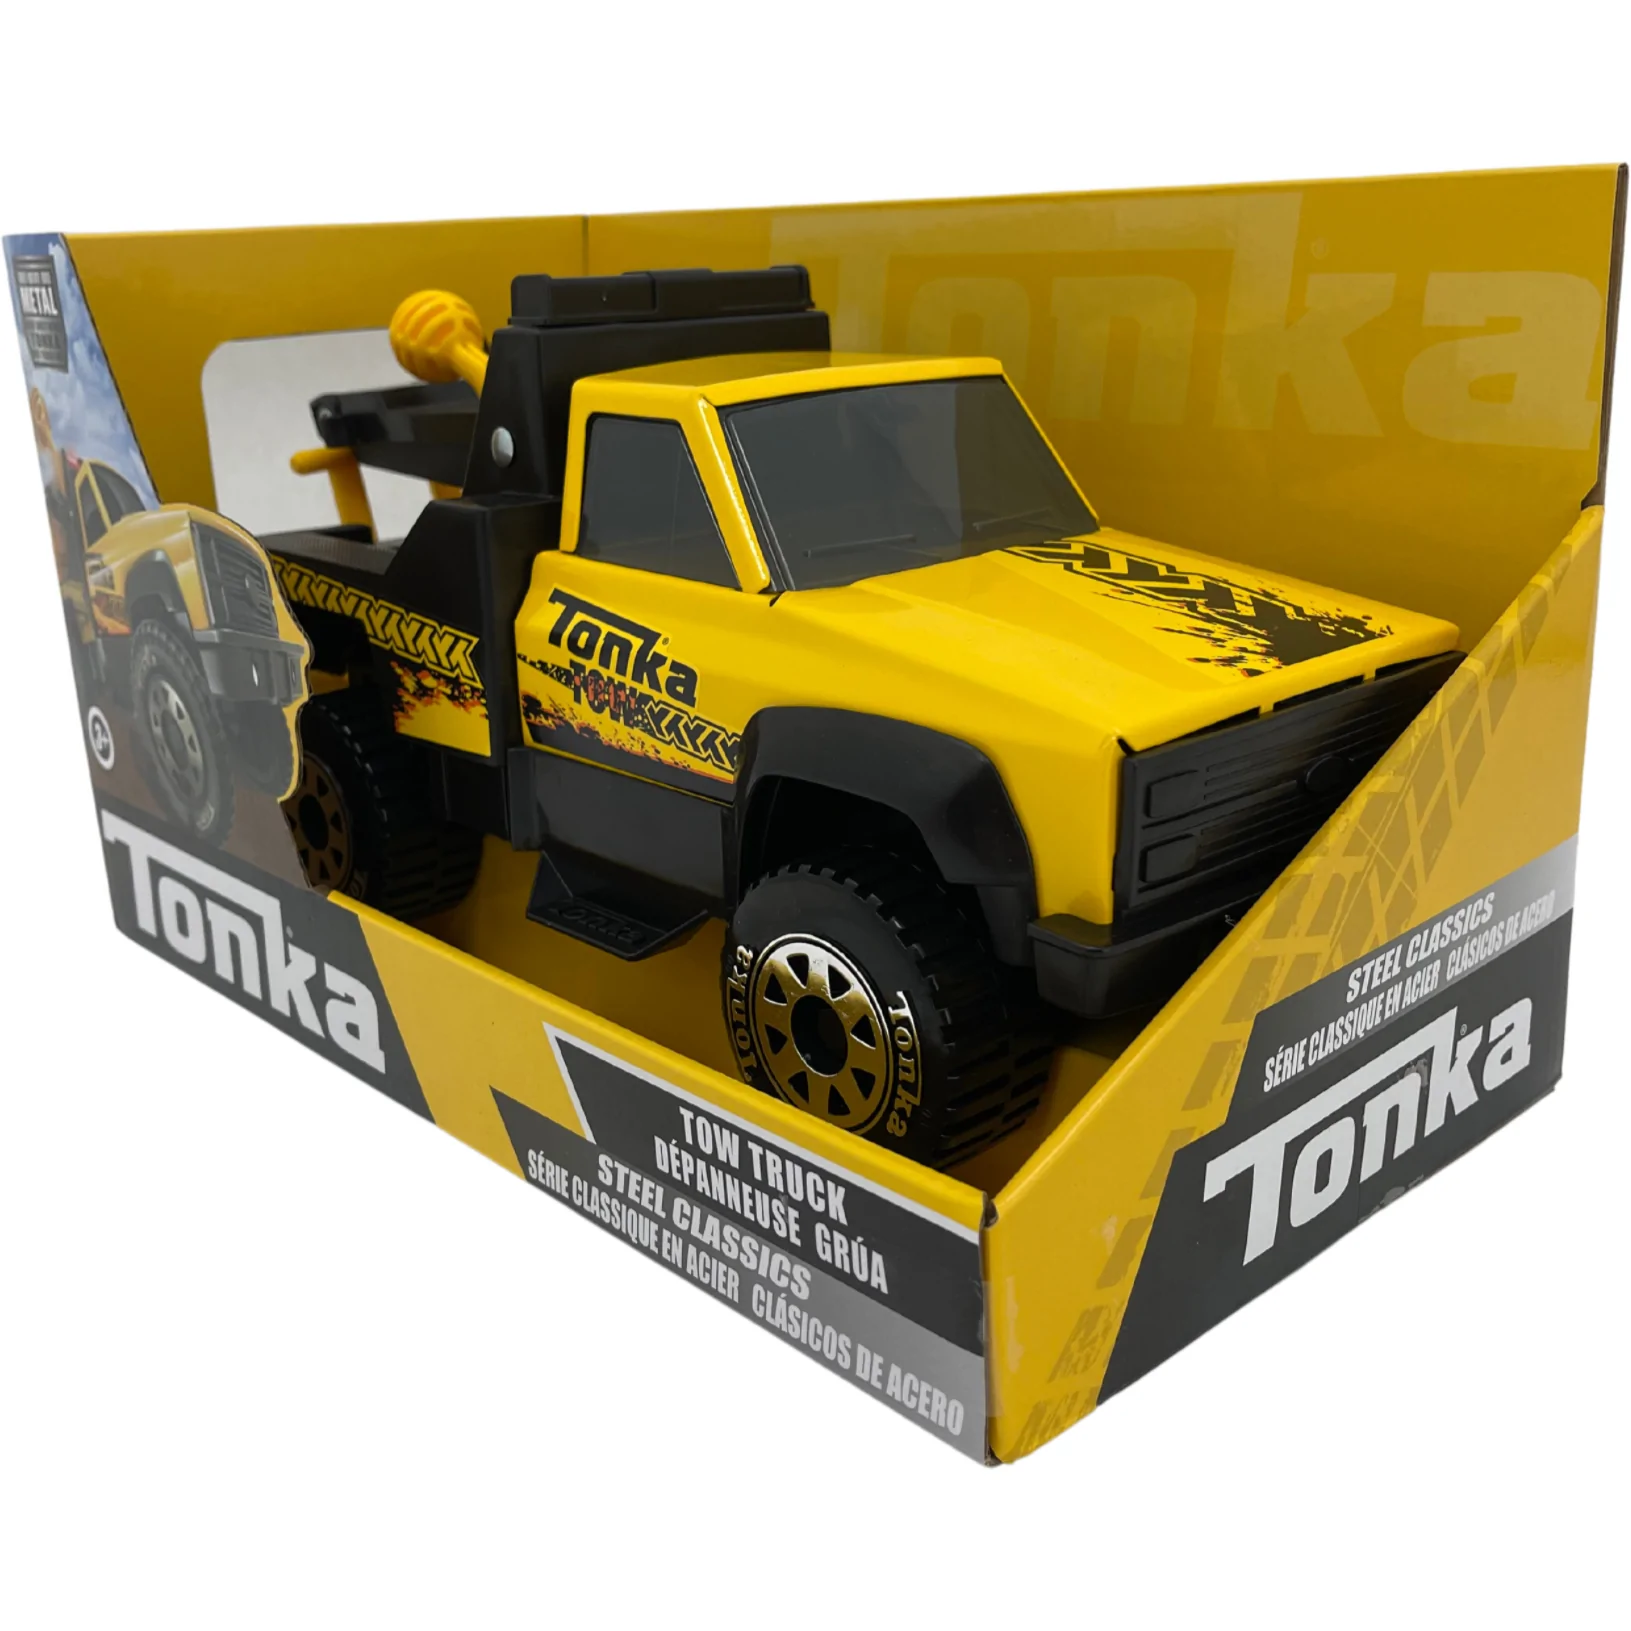 Tonka Metal Tow Truck Toy / Yellow & Black / Steel Classics / Road Side Assistance